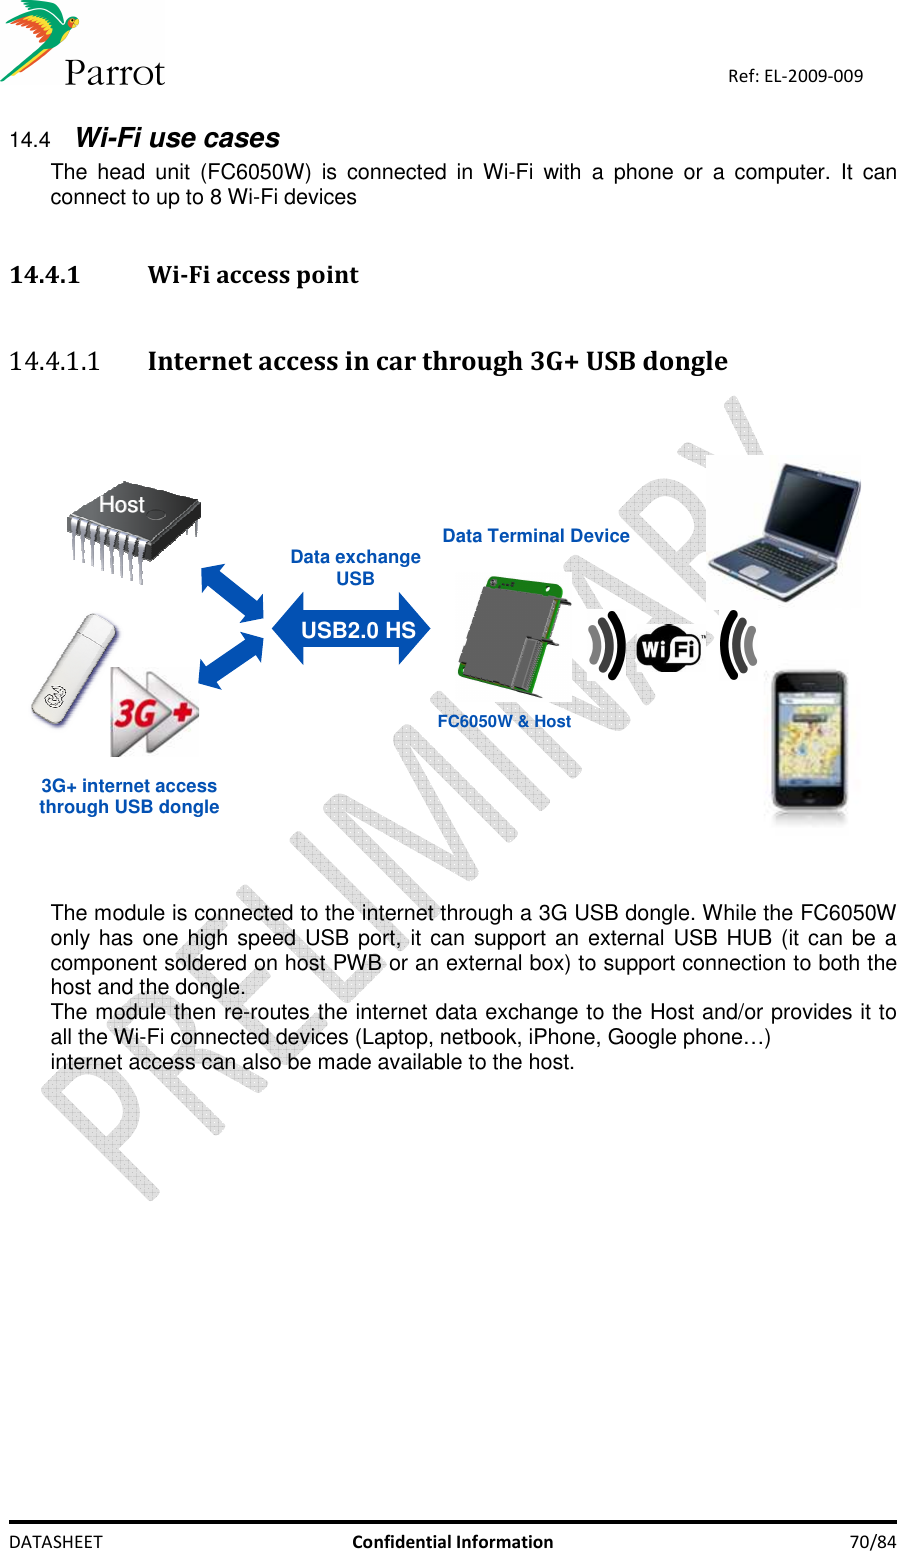    DATASHEET  Confidential Information  70/84 Ref: EL-2009-009 14.4  Wi-Fi use cases The  head  unit  (FC6050W)  is  connected  in Wi-Fi  with  a  phone  or  a  computer.  It  can connect to up to 8 Wi-Fi devices  14.4.1 Wi-Fi access point   14.4.1.1 Internet access in car through 3G+ USB dongle  3G+ internet access  through USB dongle Data exchangeUSB Data Terminal DeviceUSB2.0 HS FC6050W &amp; Host  HHoosstt    The module is connected to the internet through a 3G USB dongle. While the FC6050W only has one high speed USB port, it can support an external USB HUB (it can be a component soldered on host PWB or an external box) to support connection to both the host and the dongle. The module then re-routes the internet data exchange to the Host and/or provides it to all the Wi-Fi connected devices (Laptop, netbook, iPhone, Google phone…)  internet access can also be made available to the host.                 